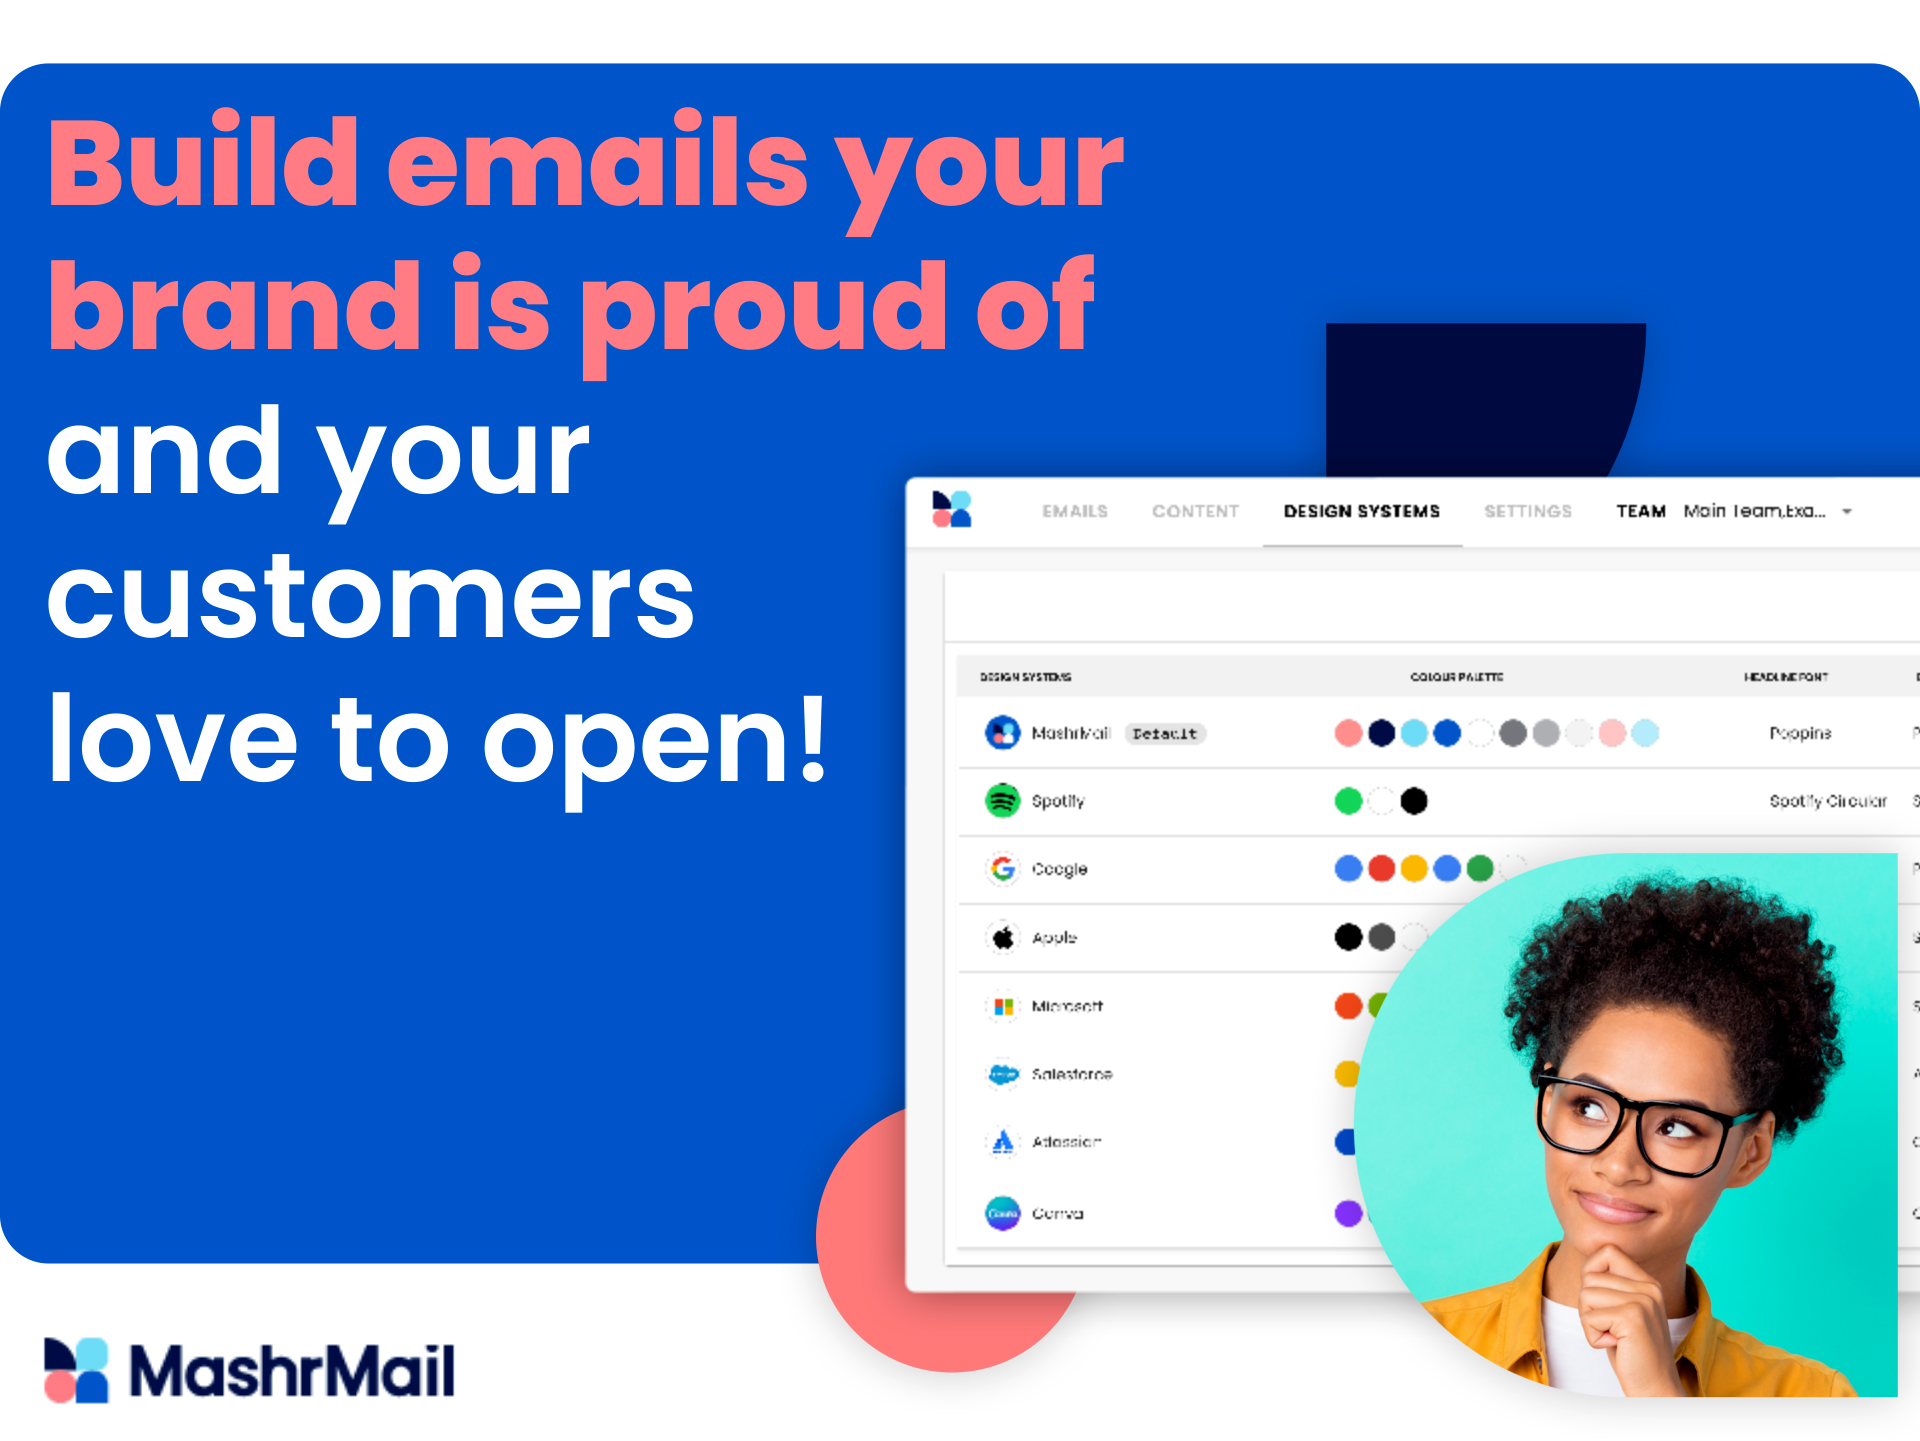 Build emails your brand is proud of and your customers love to open!